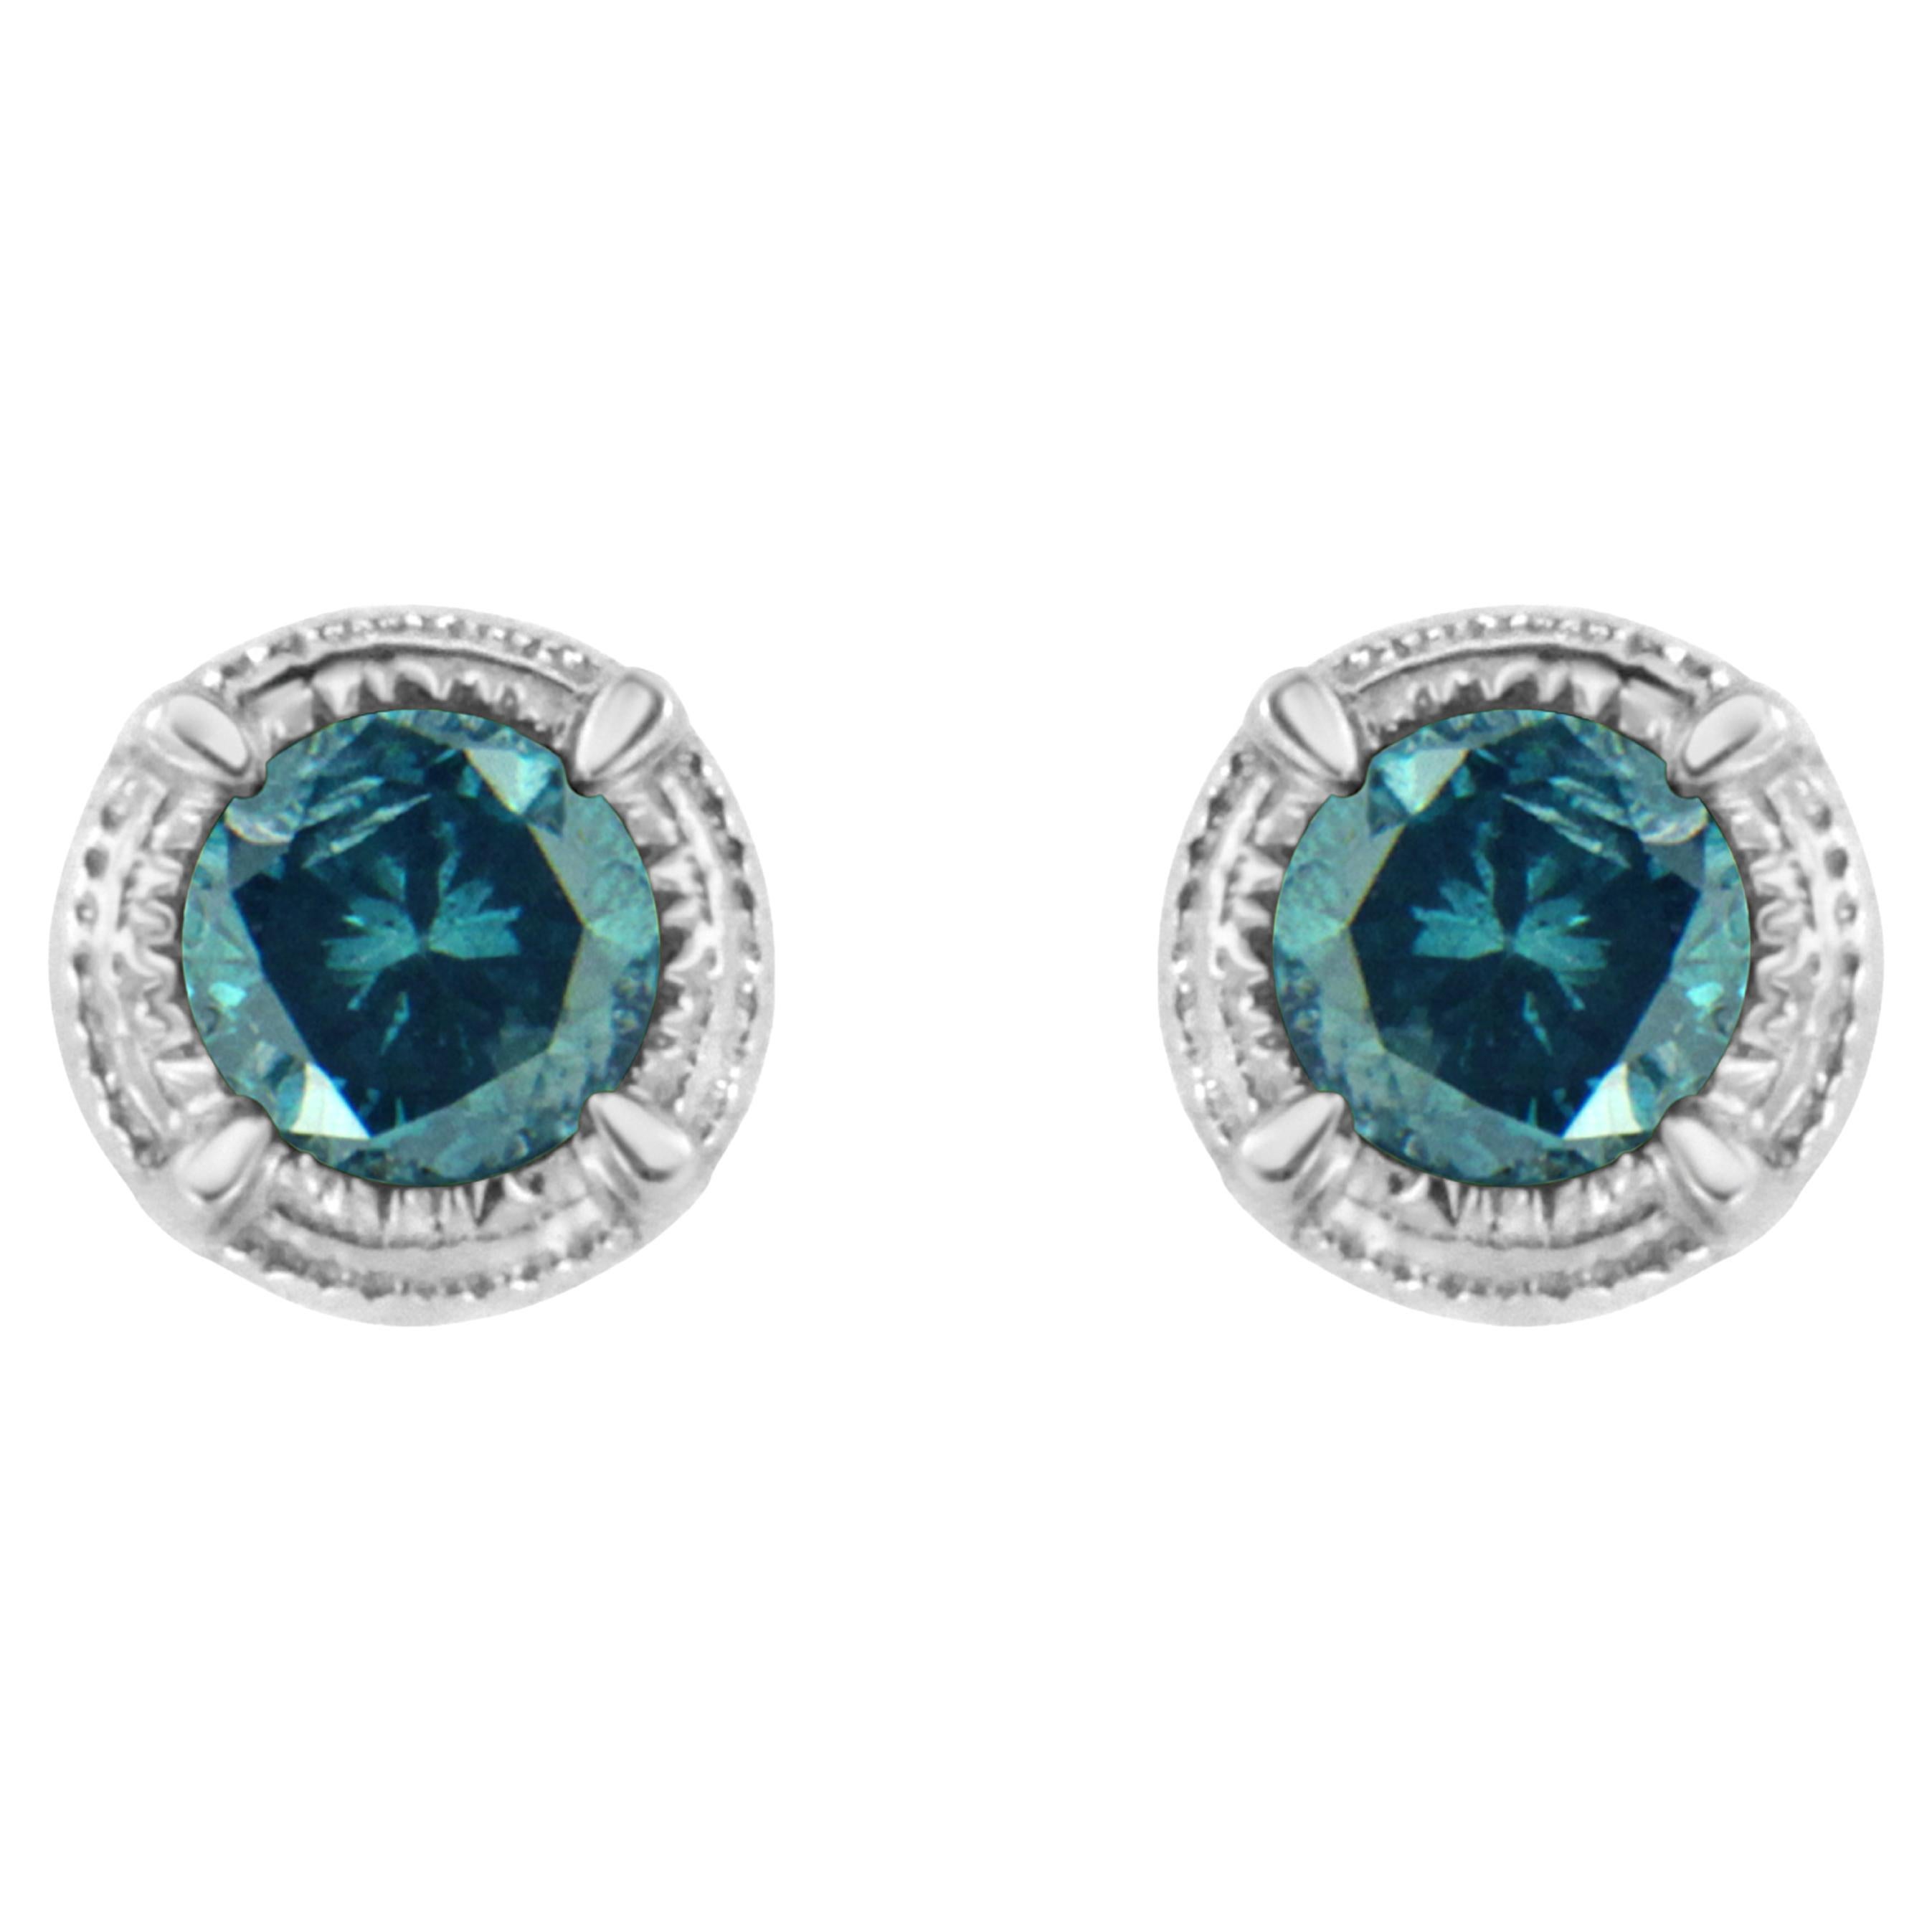 .925 Sterling Silver 1/4 Carat Treated Blue Diamond Solitaire Stud Earrings